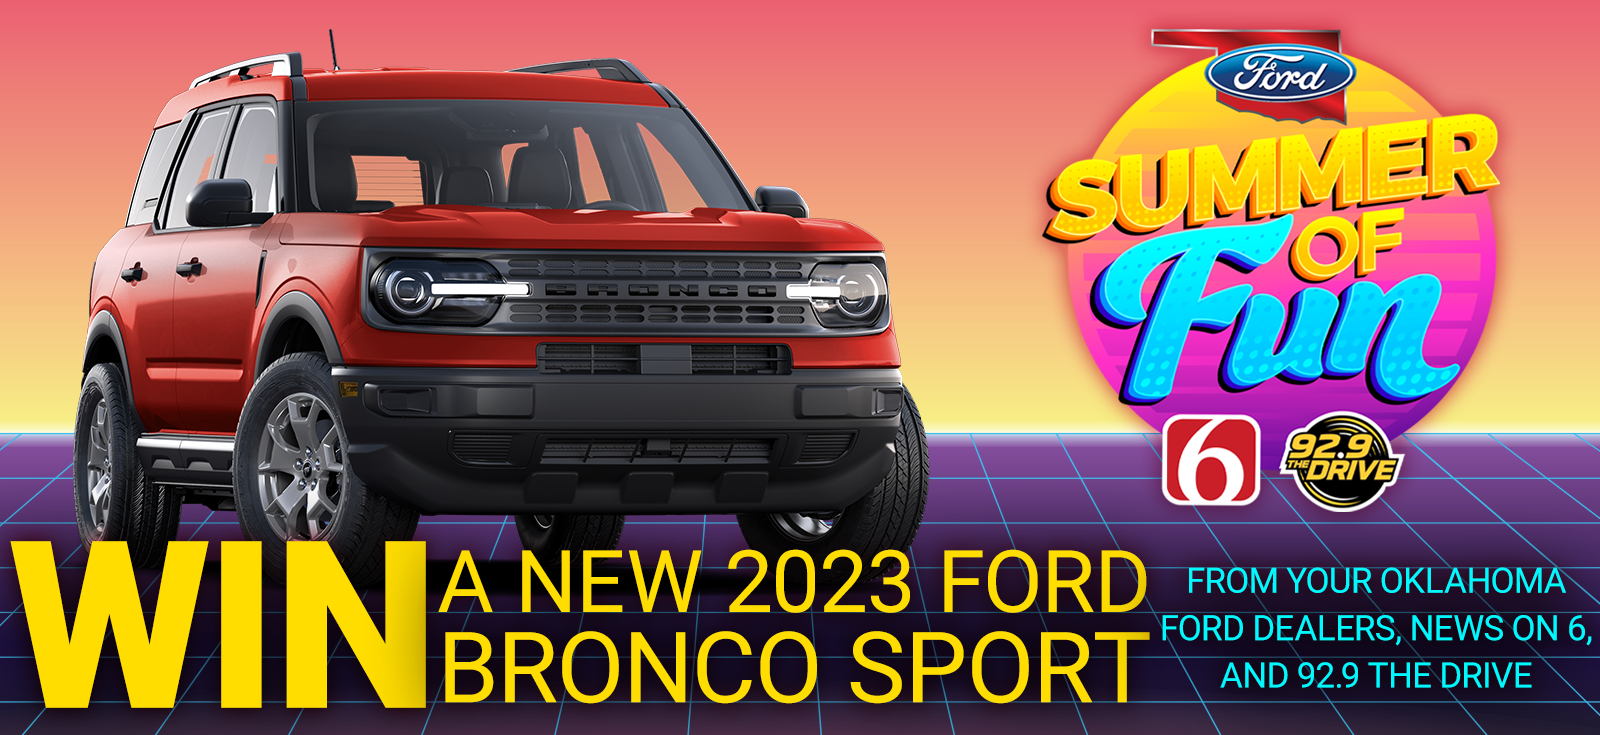 Win a NEW 2023 FORD BRONCO SPORT from News On 6